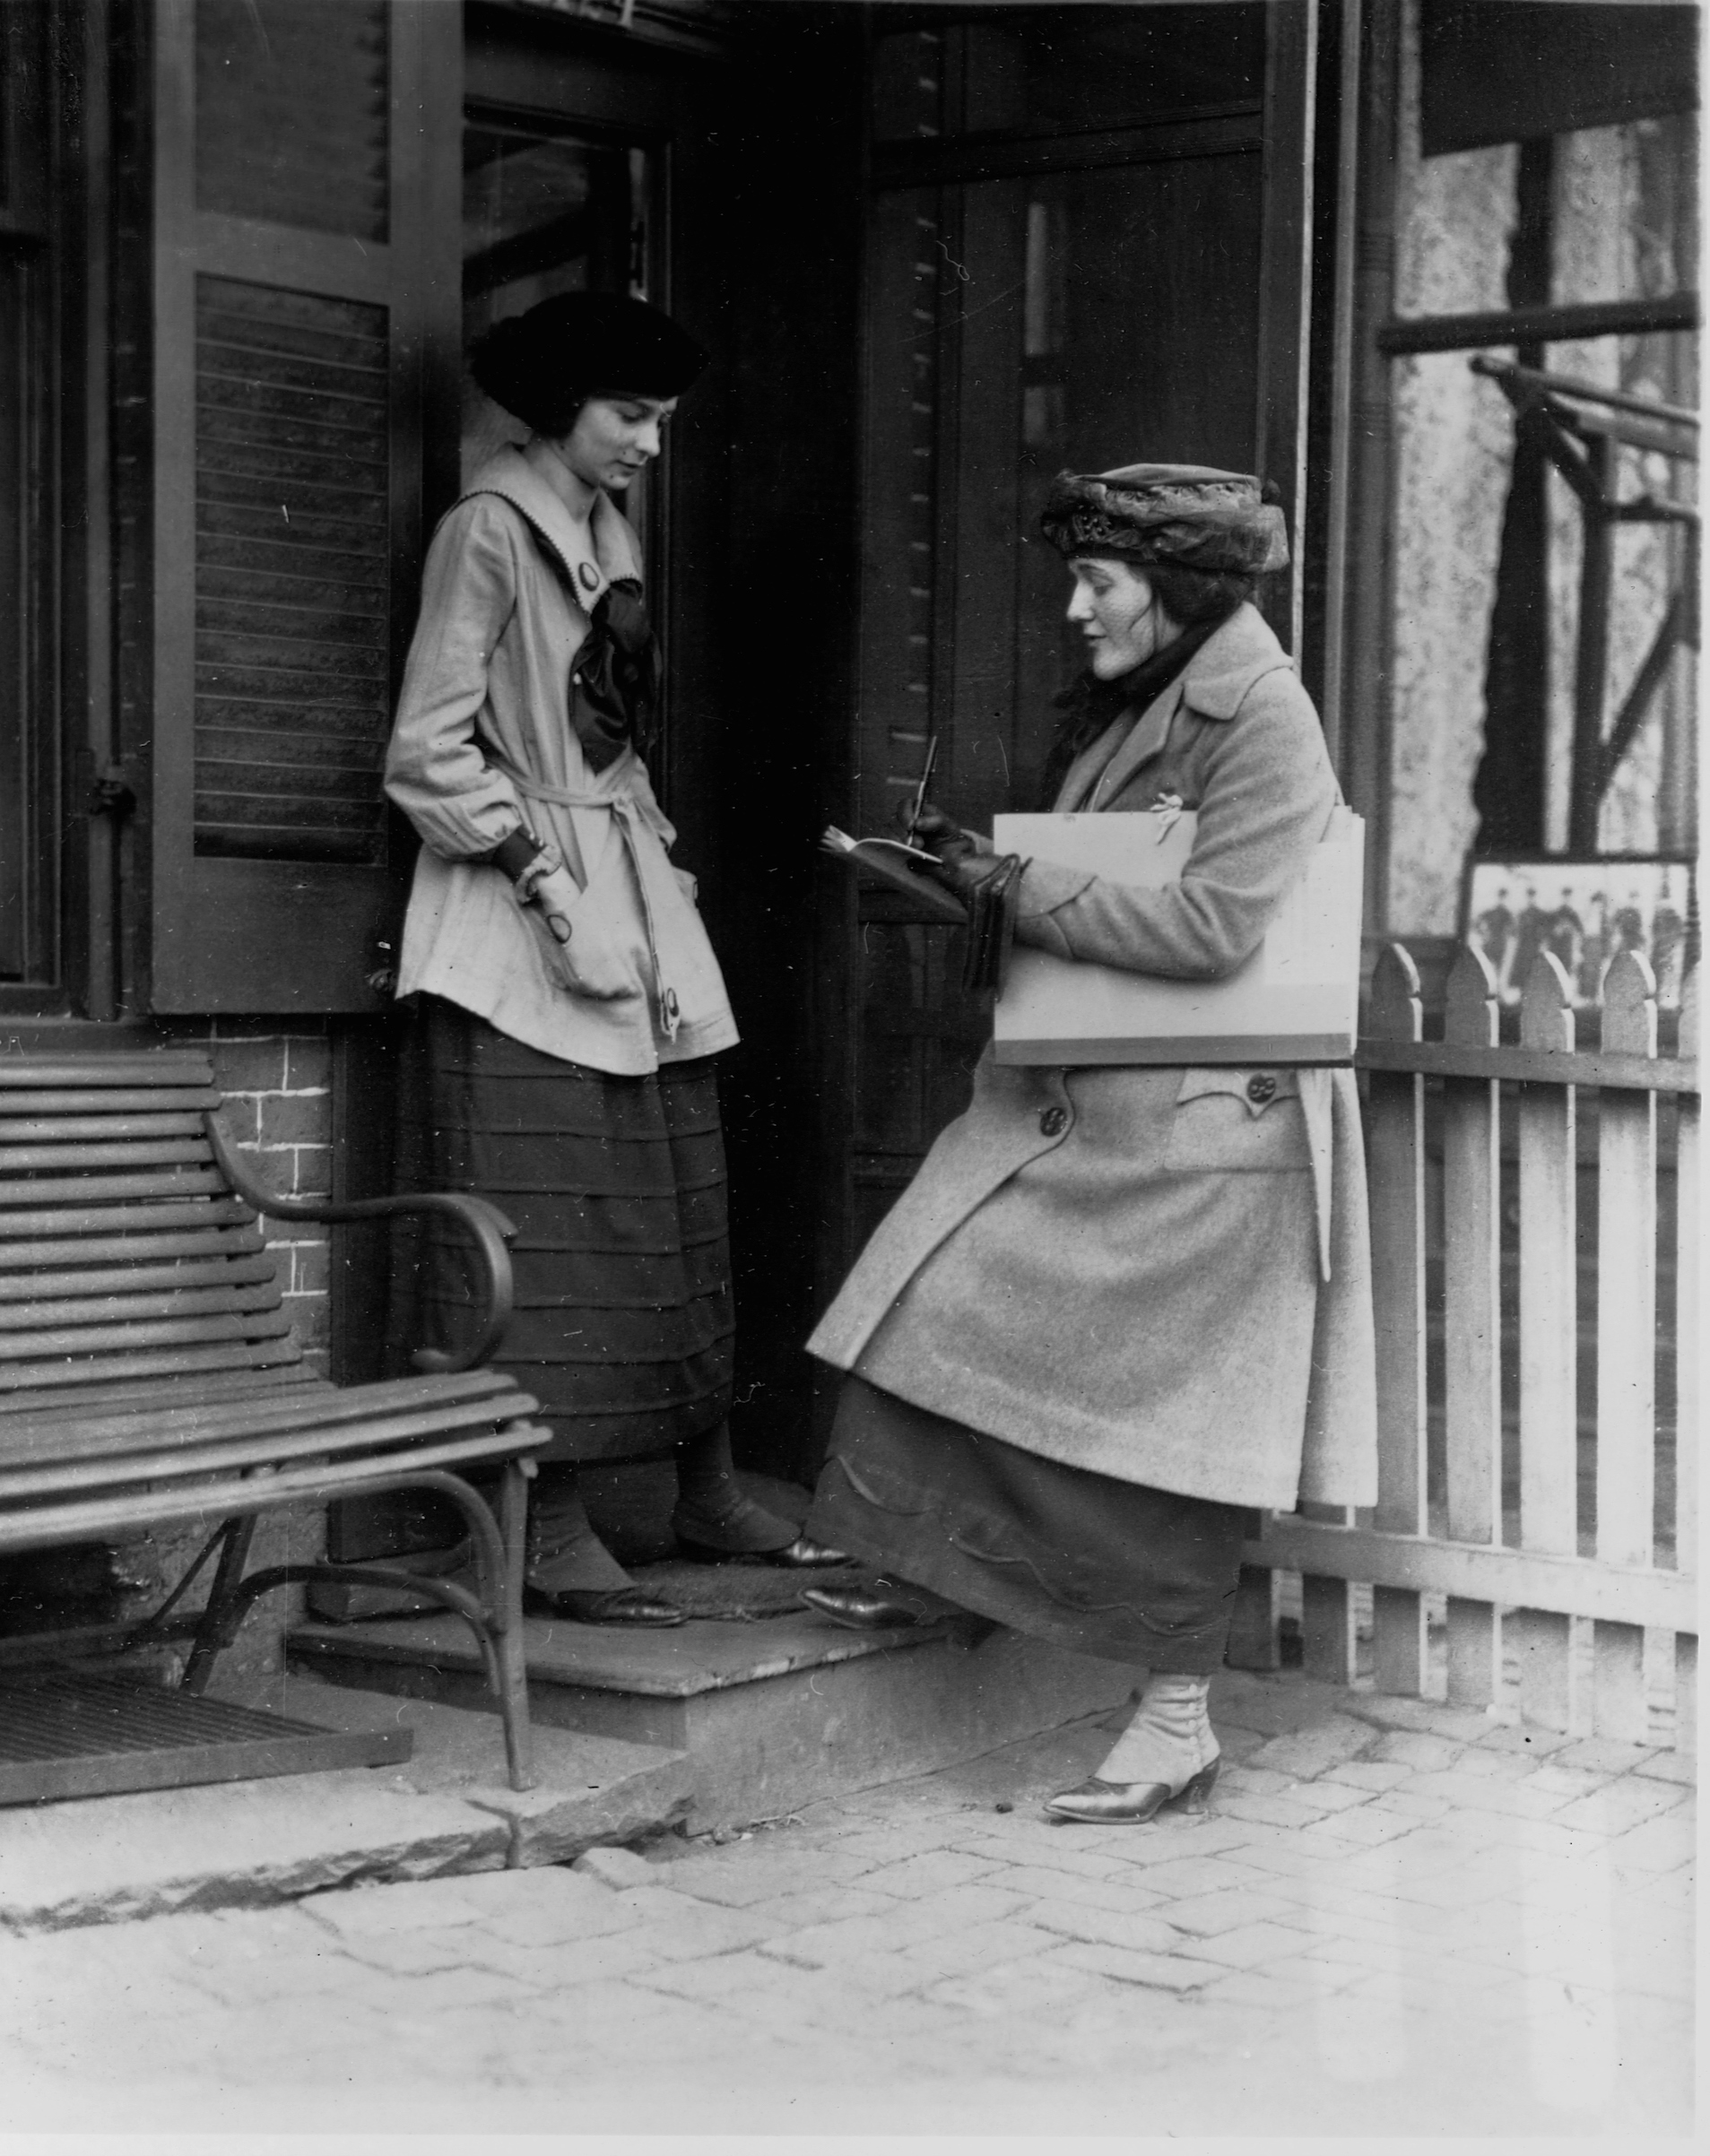 A Census taker asks questions of a woman at the door of her house, early 20th century. (Corbis/VCG/Library of Congress via Getty Images)